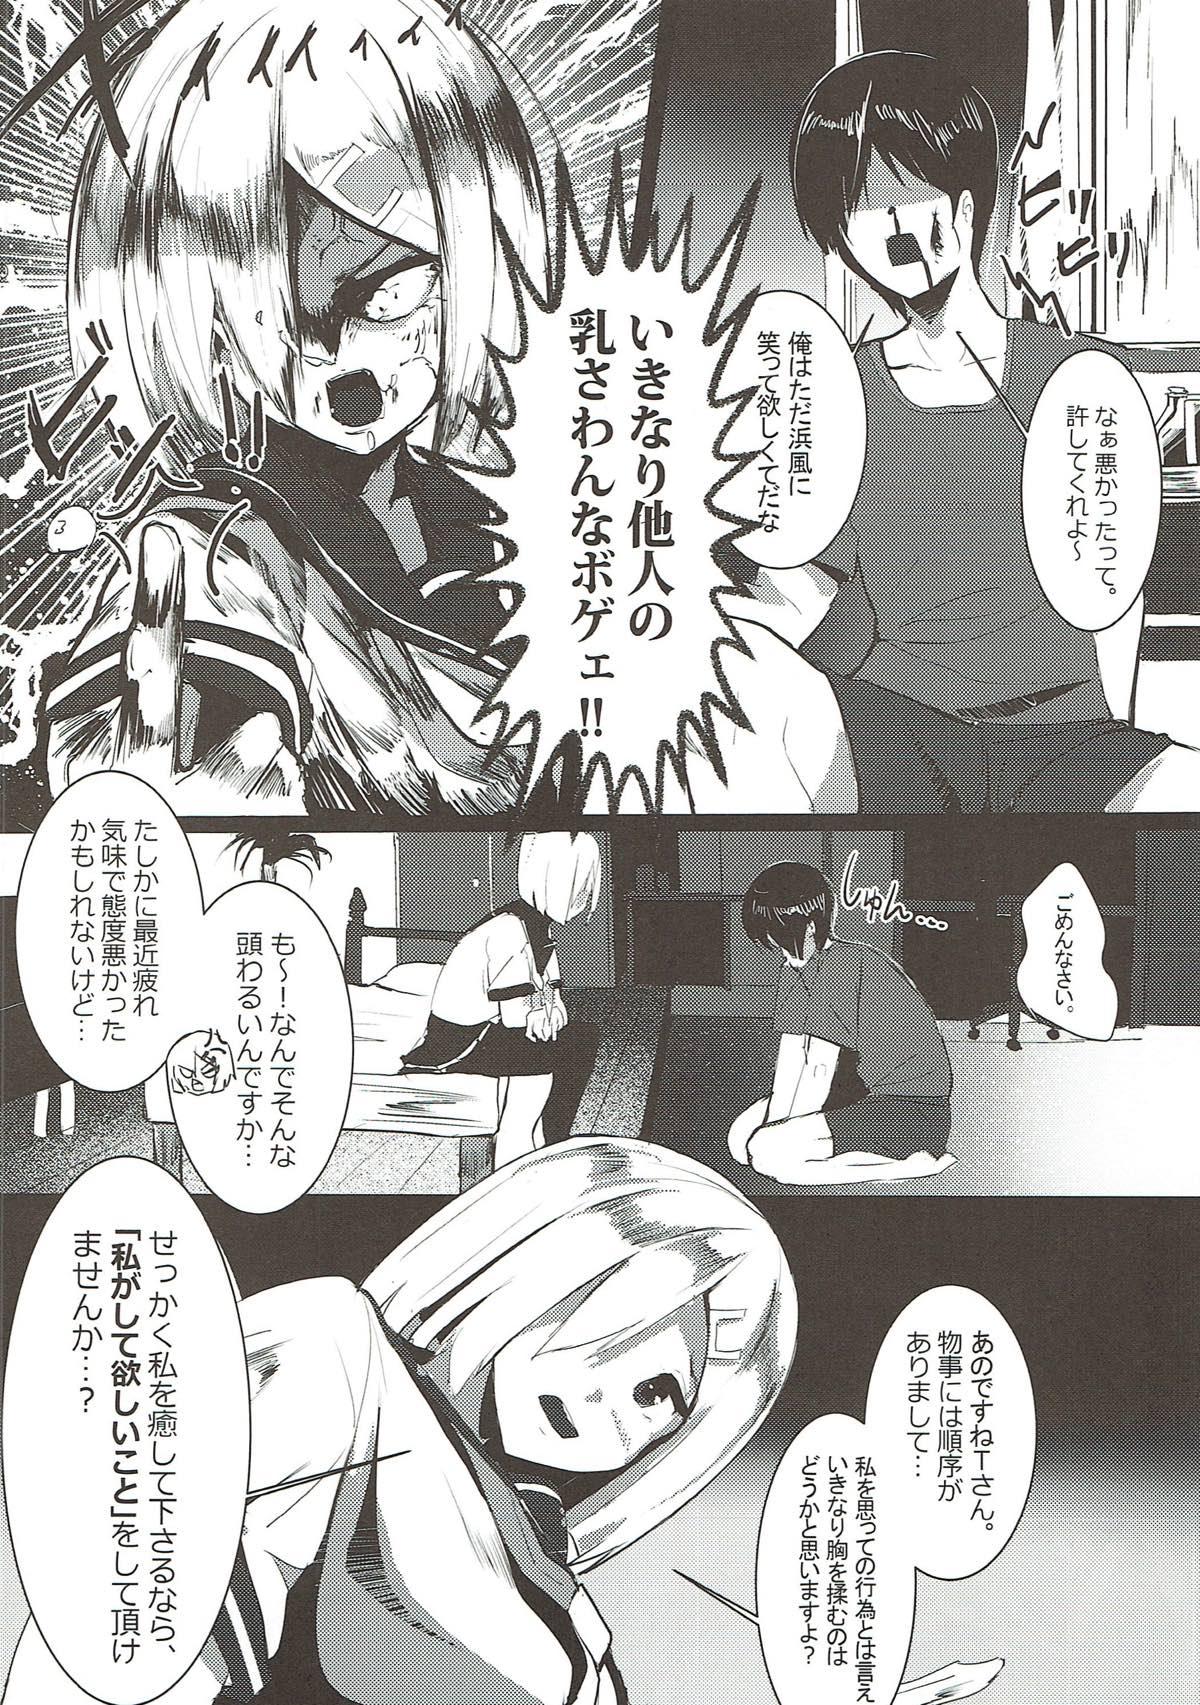 Ikillitts MELTED ABSORBEDLY - Kantai collection Novinha - Page 5